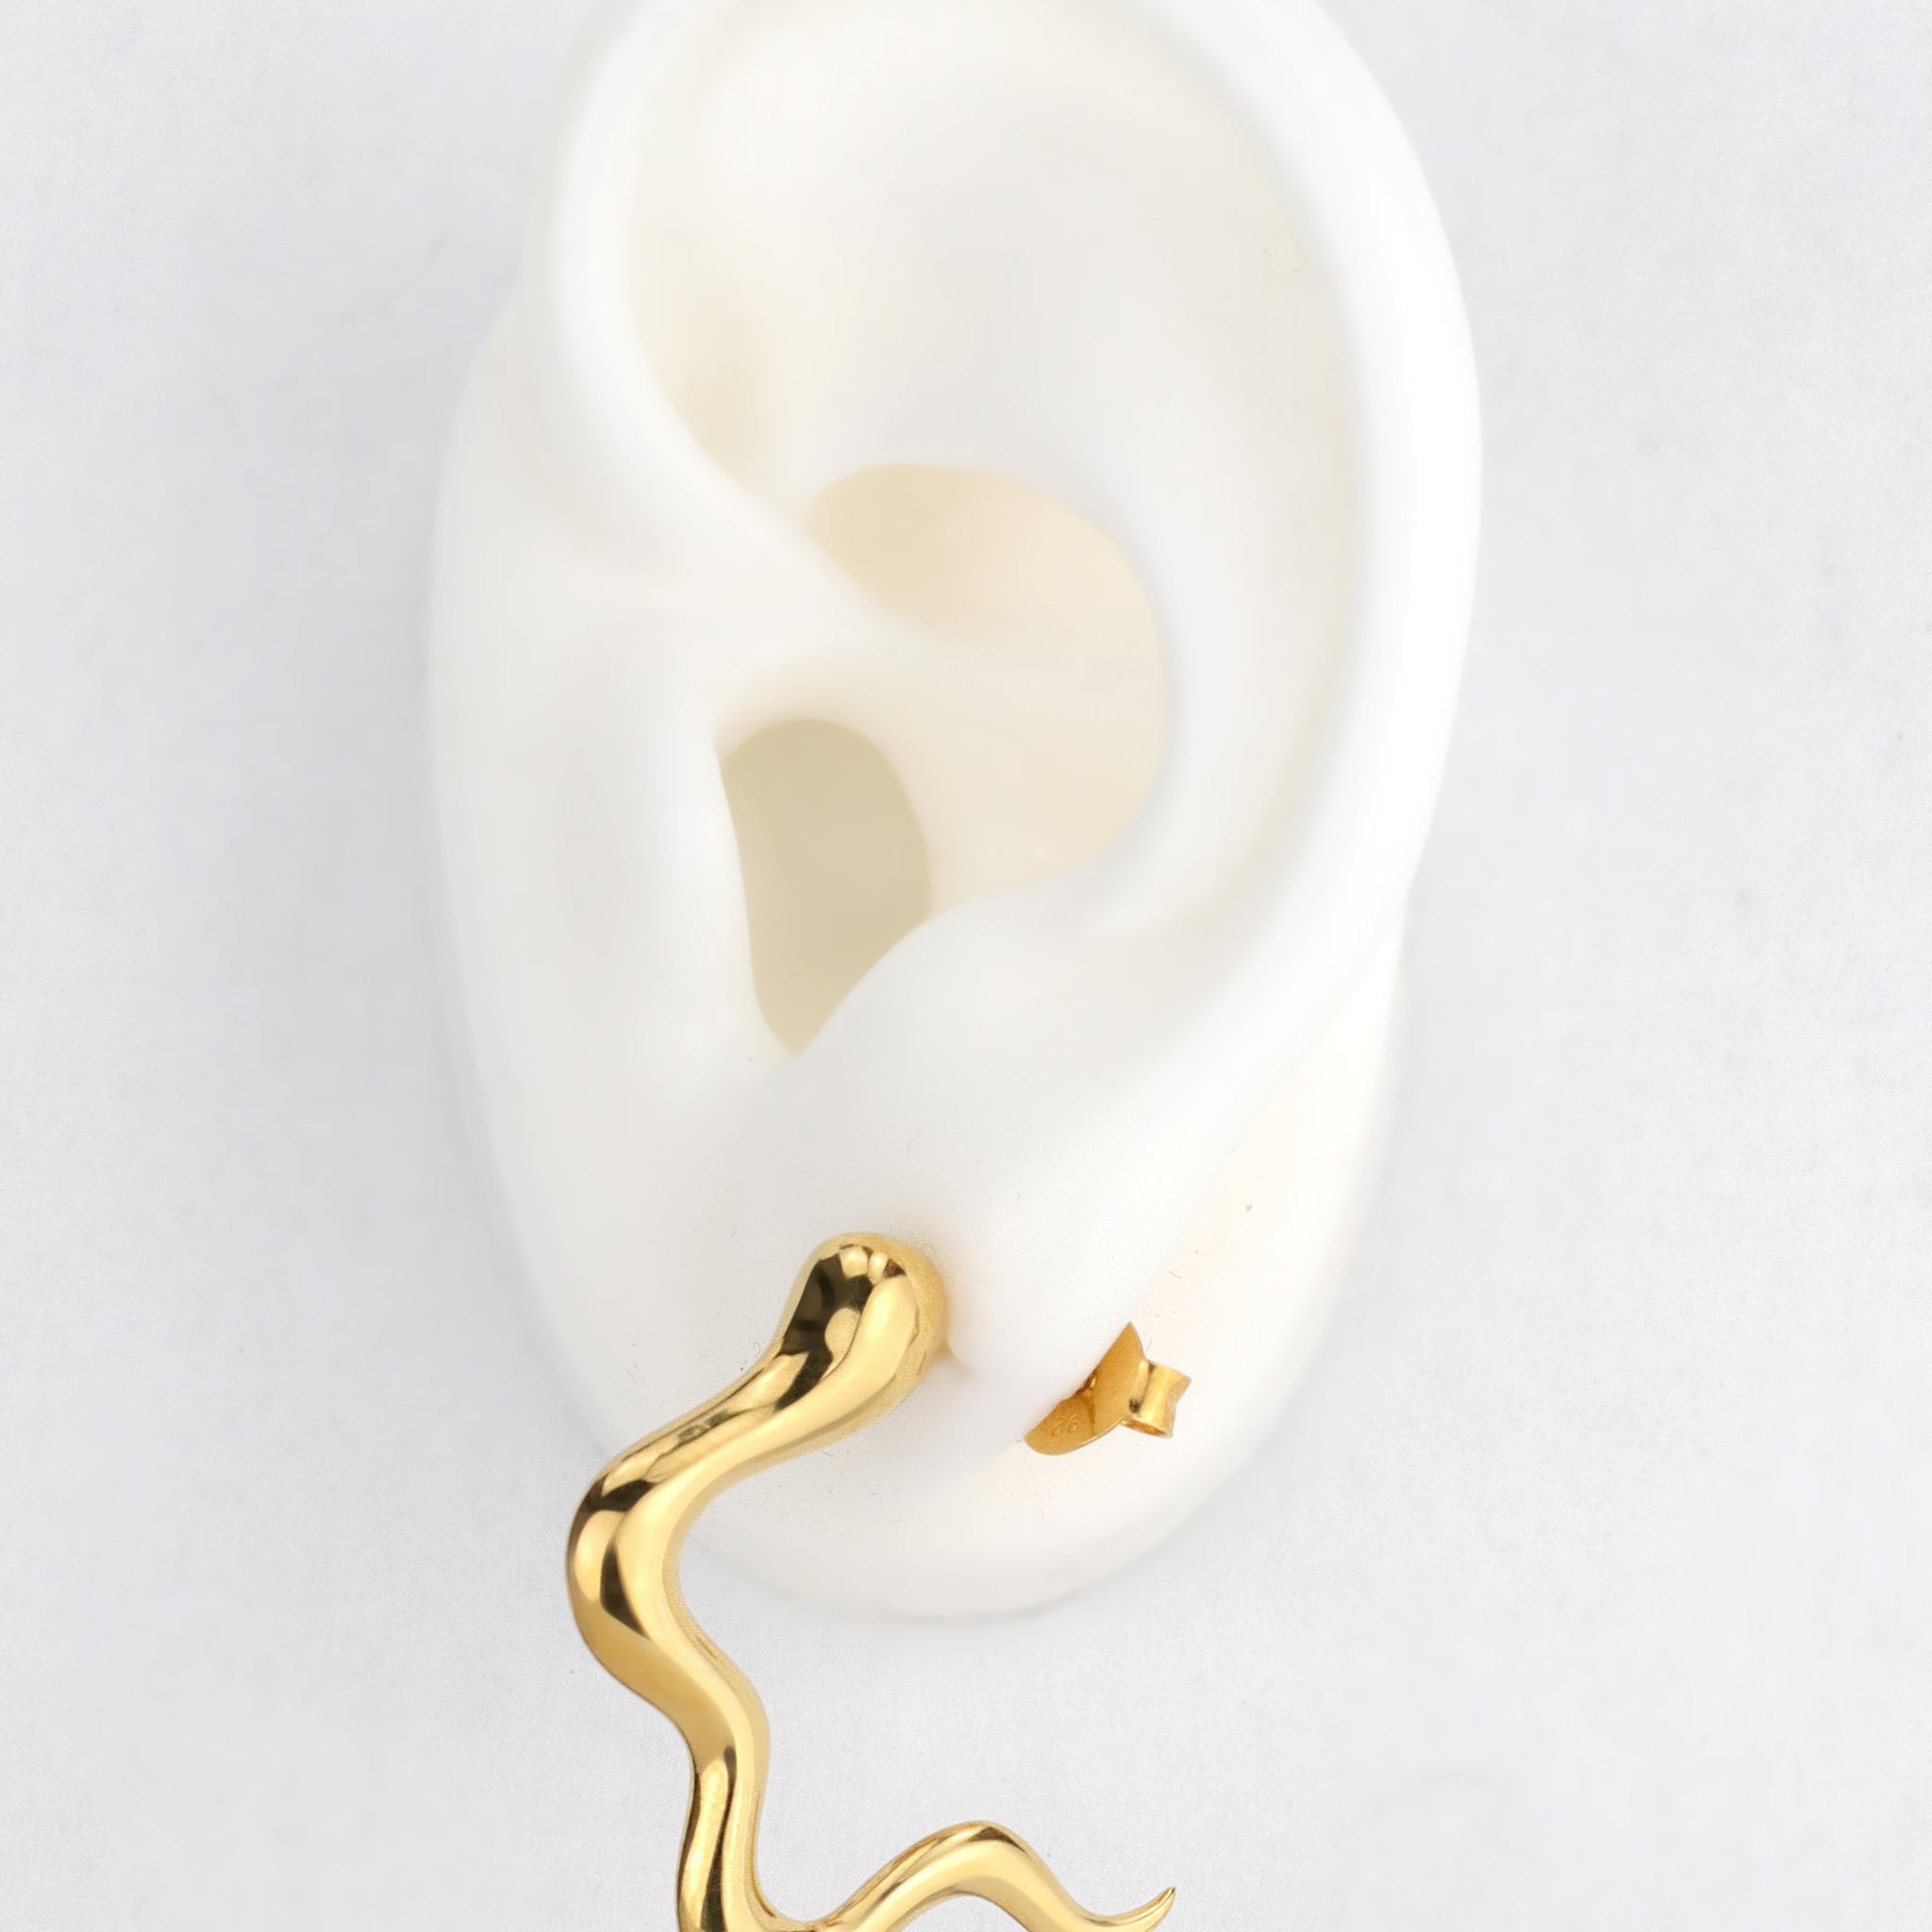 SMOOTH TENDRIL EARRING